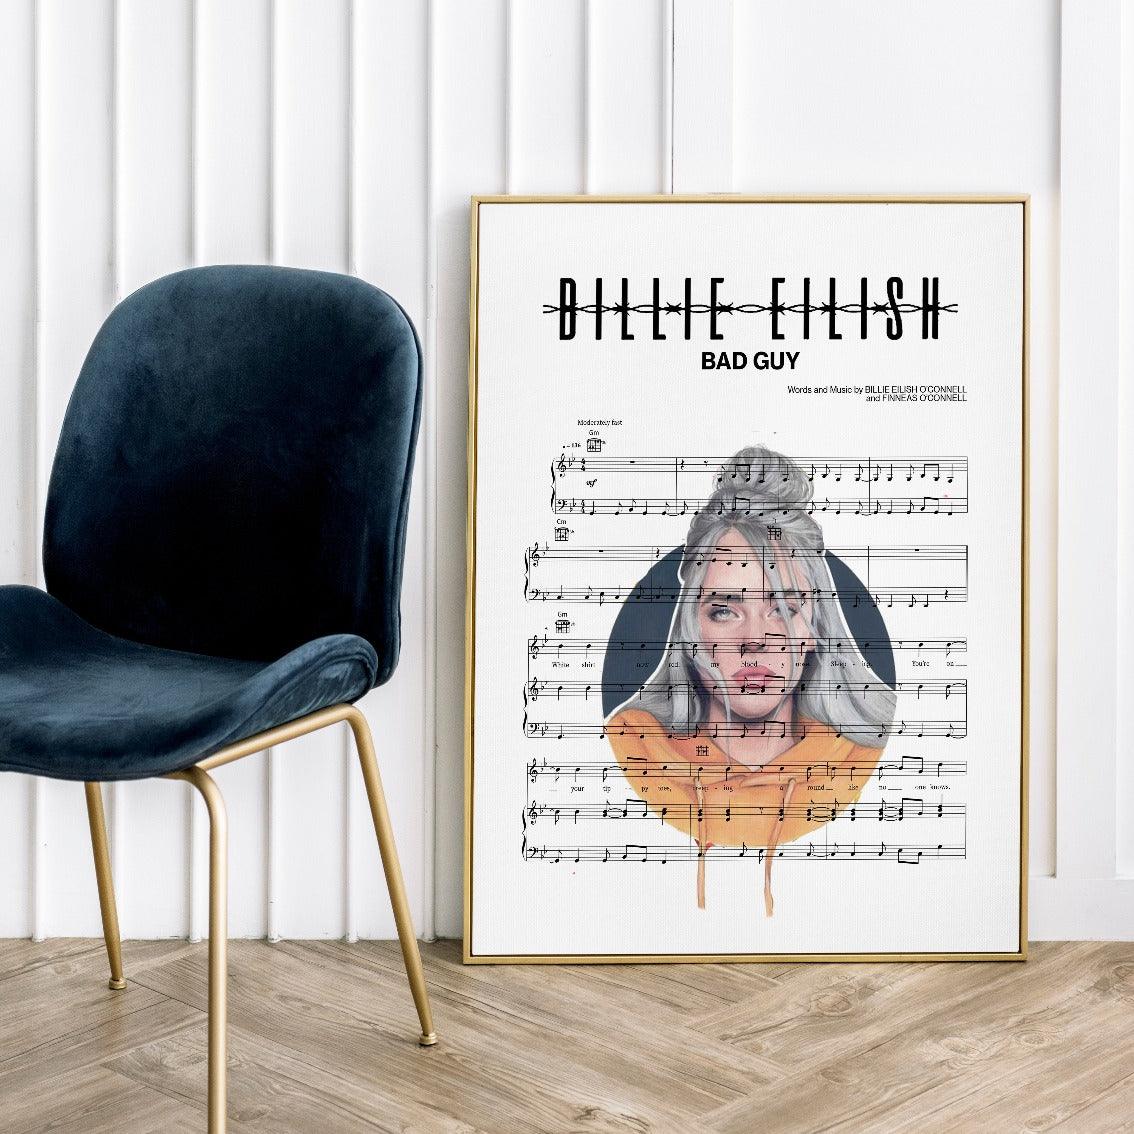 The newest release from teenage artist Billie Eilish is now available as a limited edition poster. "Bad guy" is the first single from her upcoming debut album, and is already a chart topper. This poster is a must-have for any fan of the up-and-coming artist, or for anyone who wants to add a touch of cool to their wall art collection.